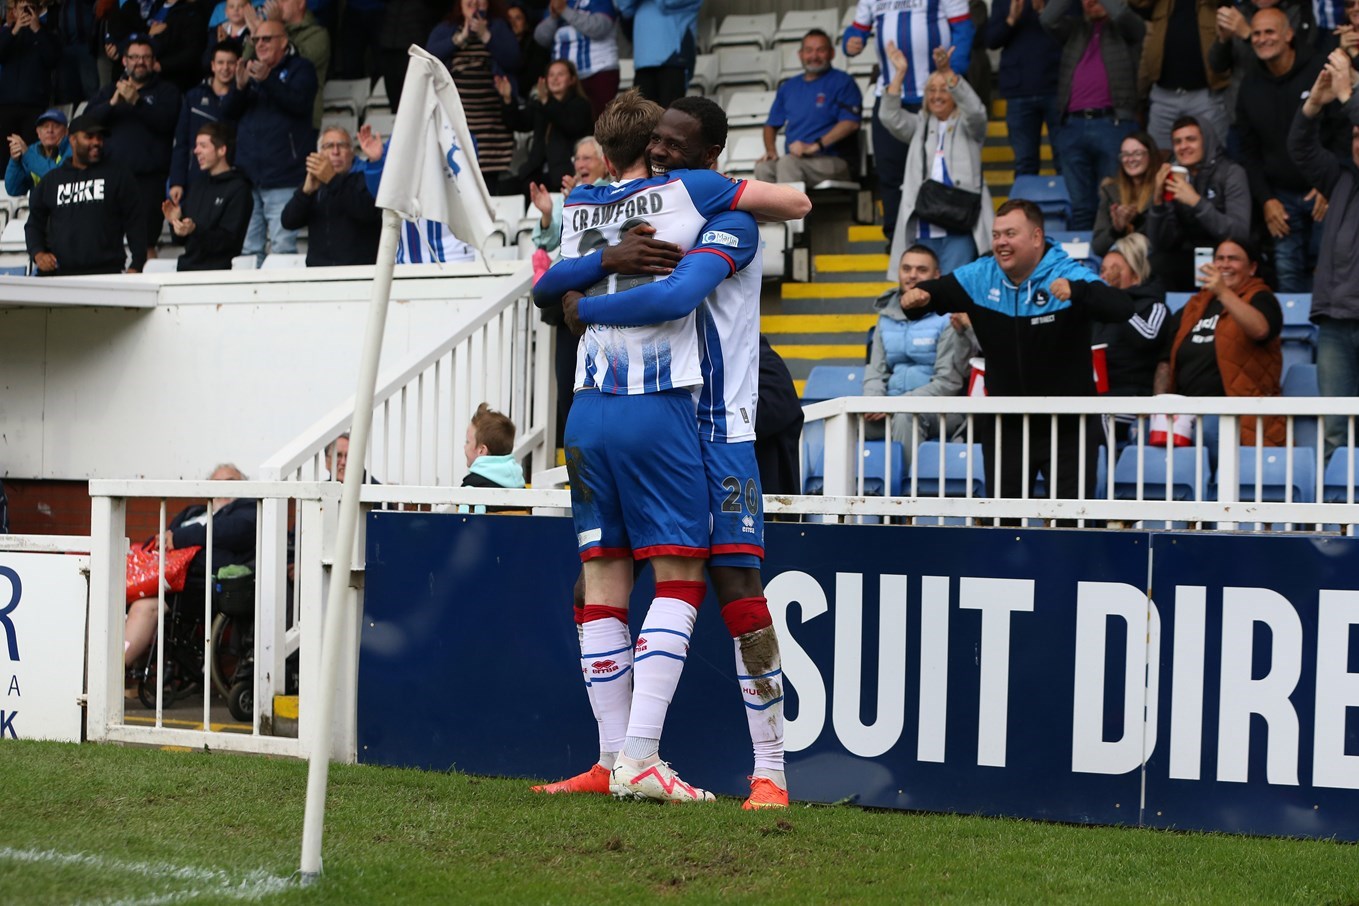 FOUR Hartlepool United players make the National League's most